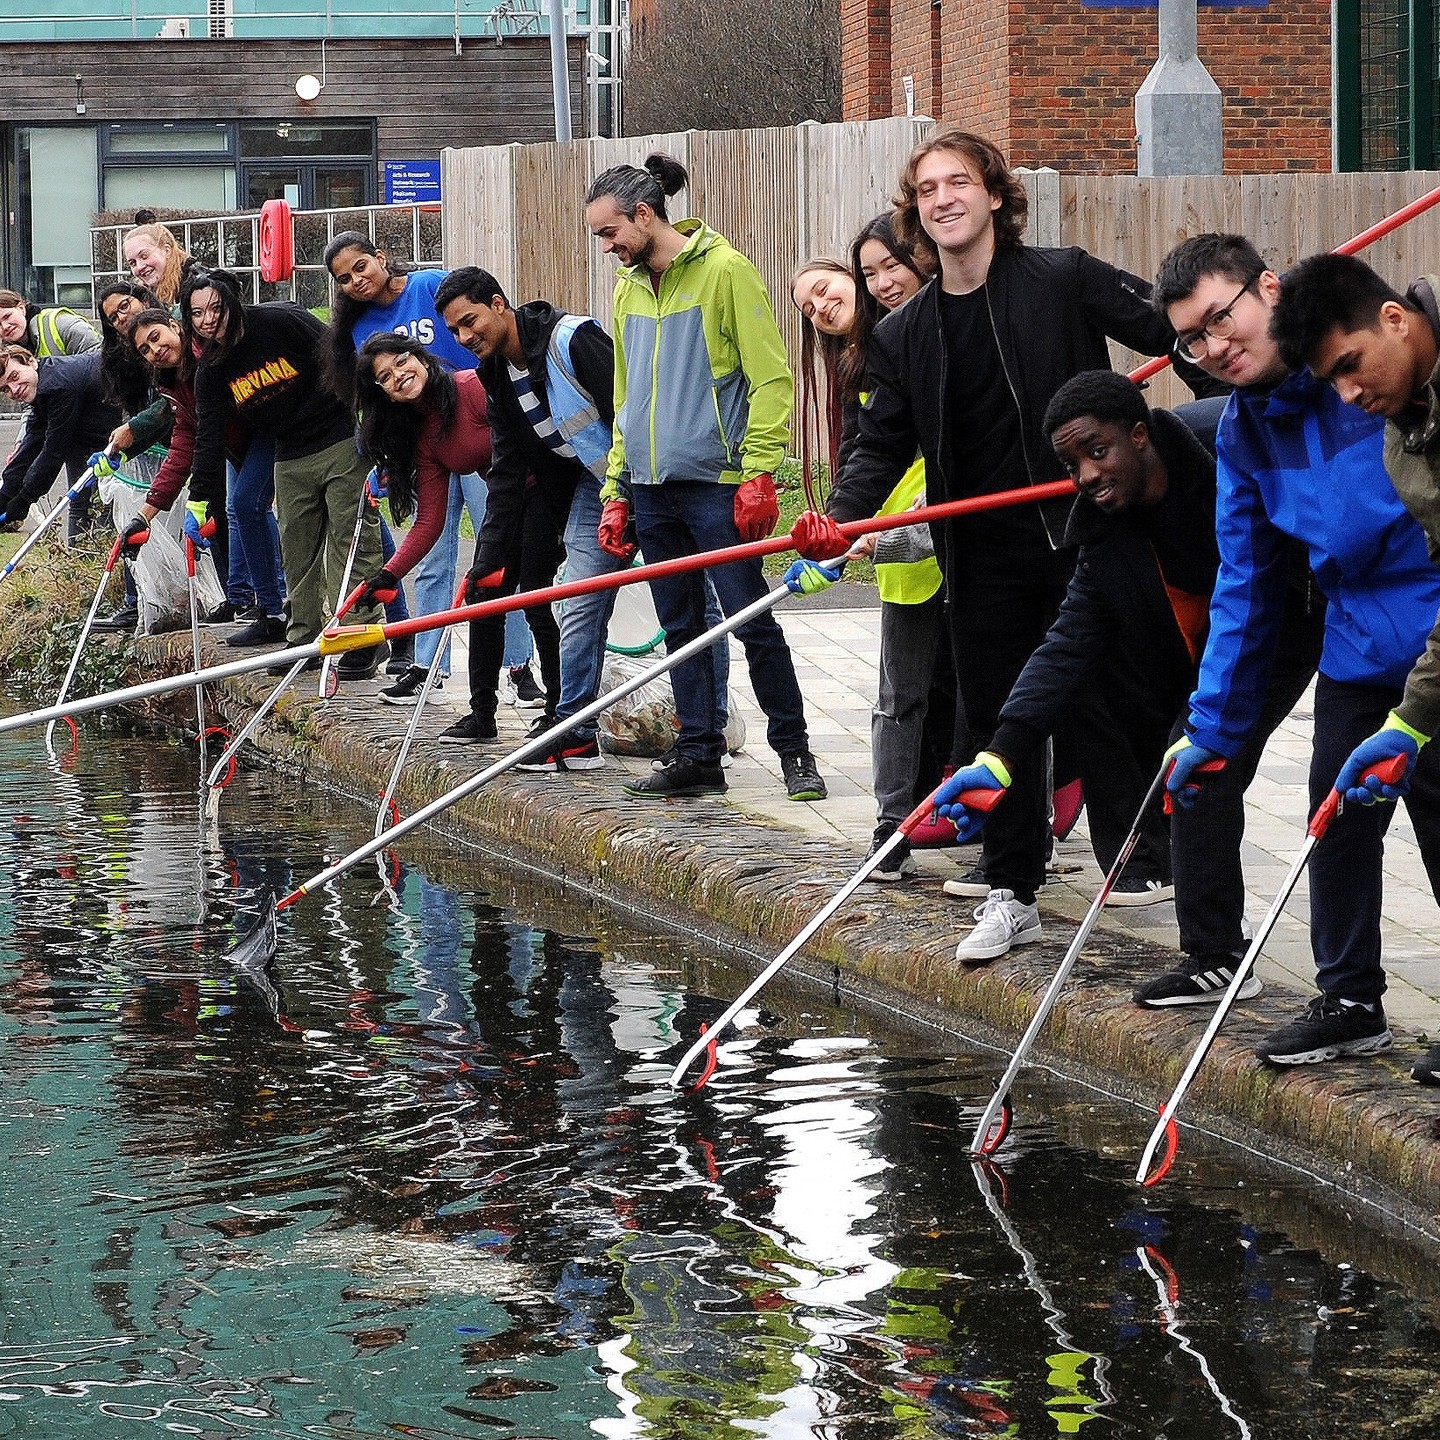 A large group of students with litter pickers and nets posing next to Regent's Canal after litter picking.